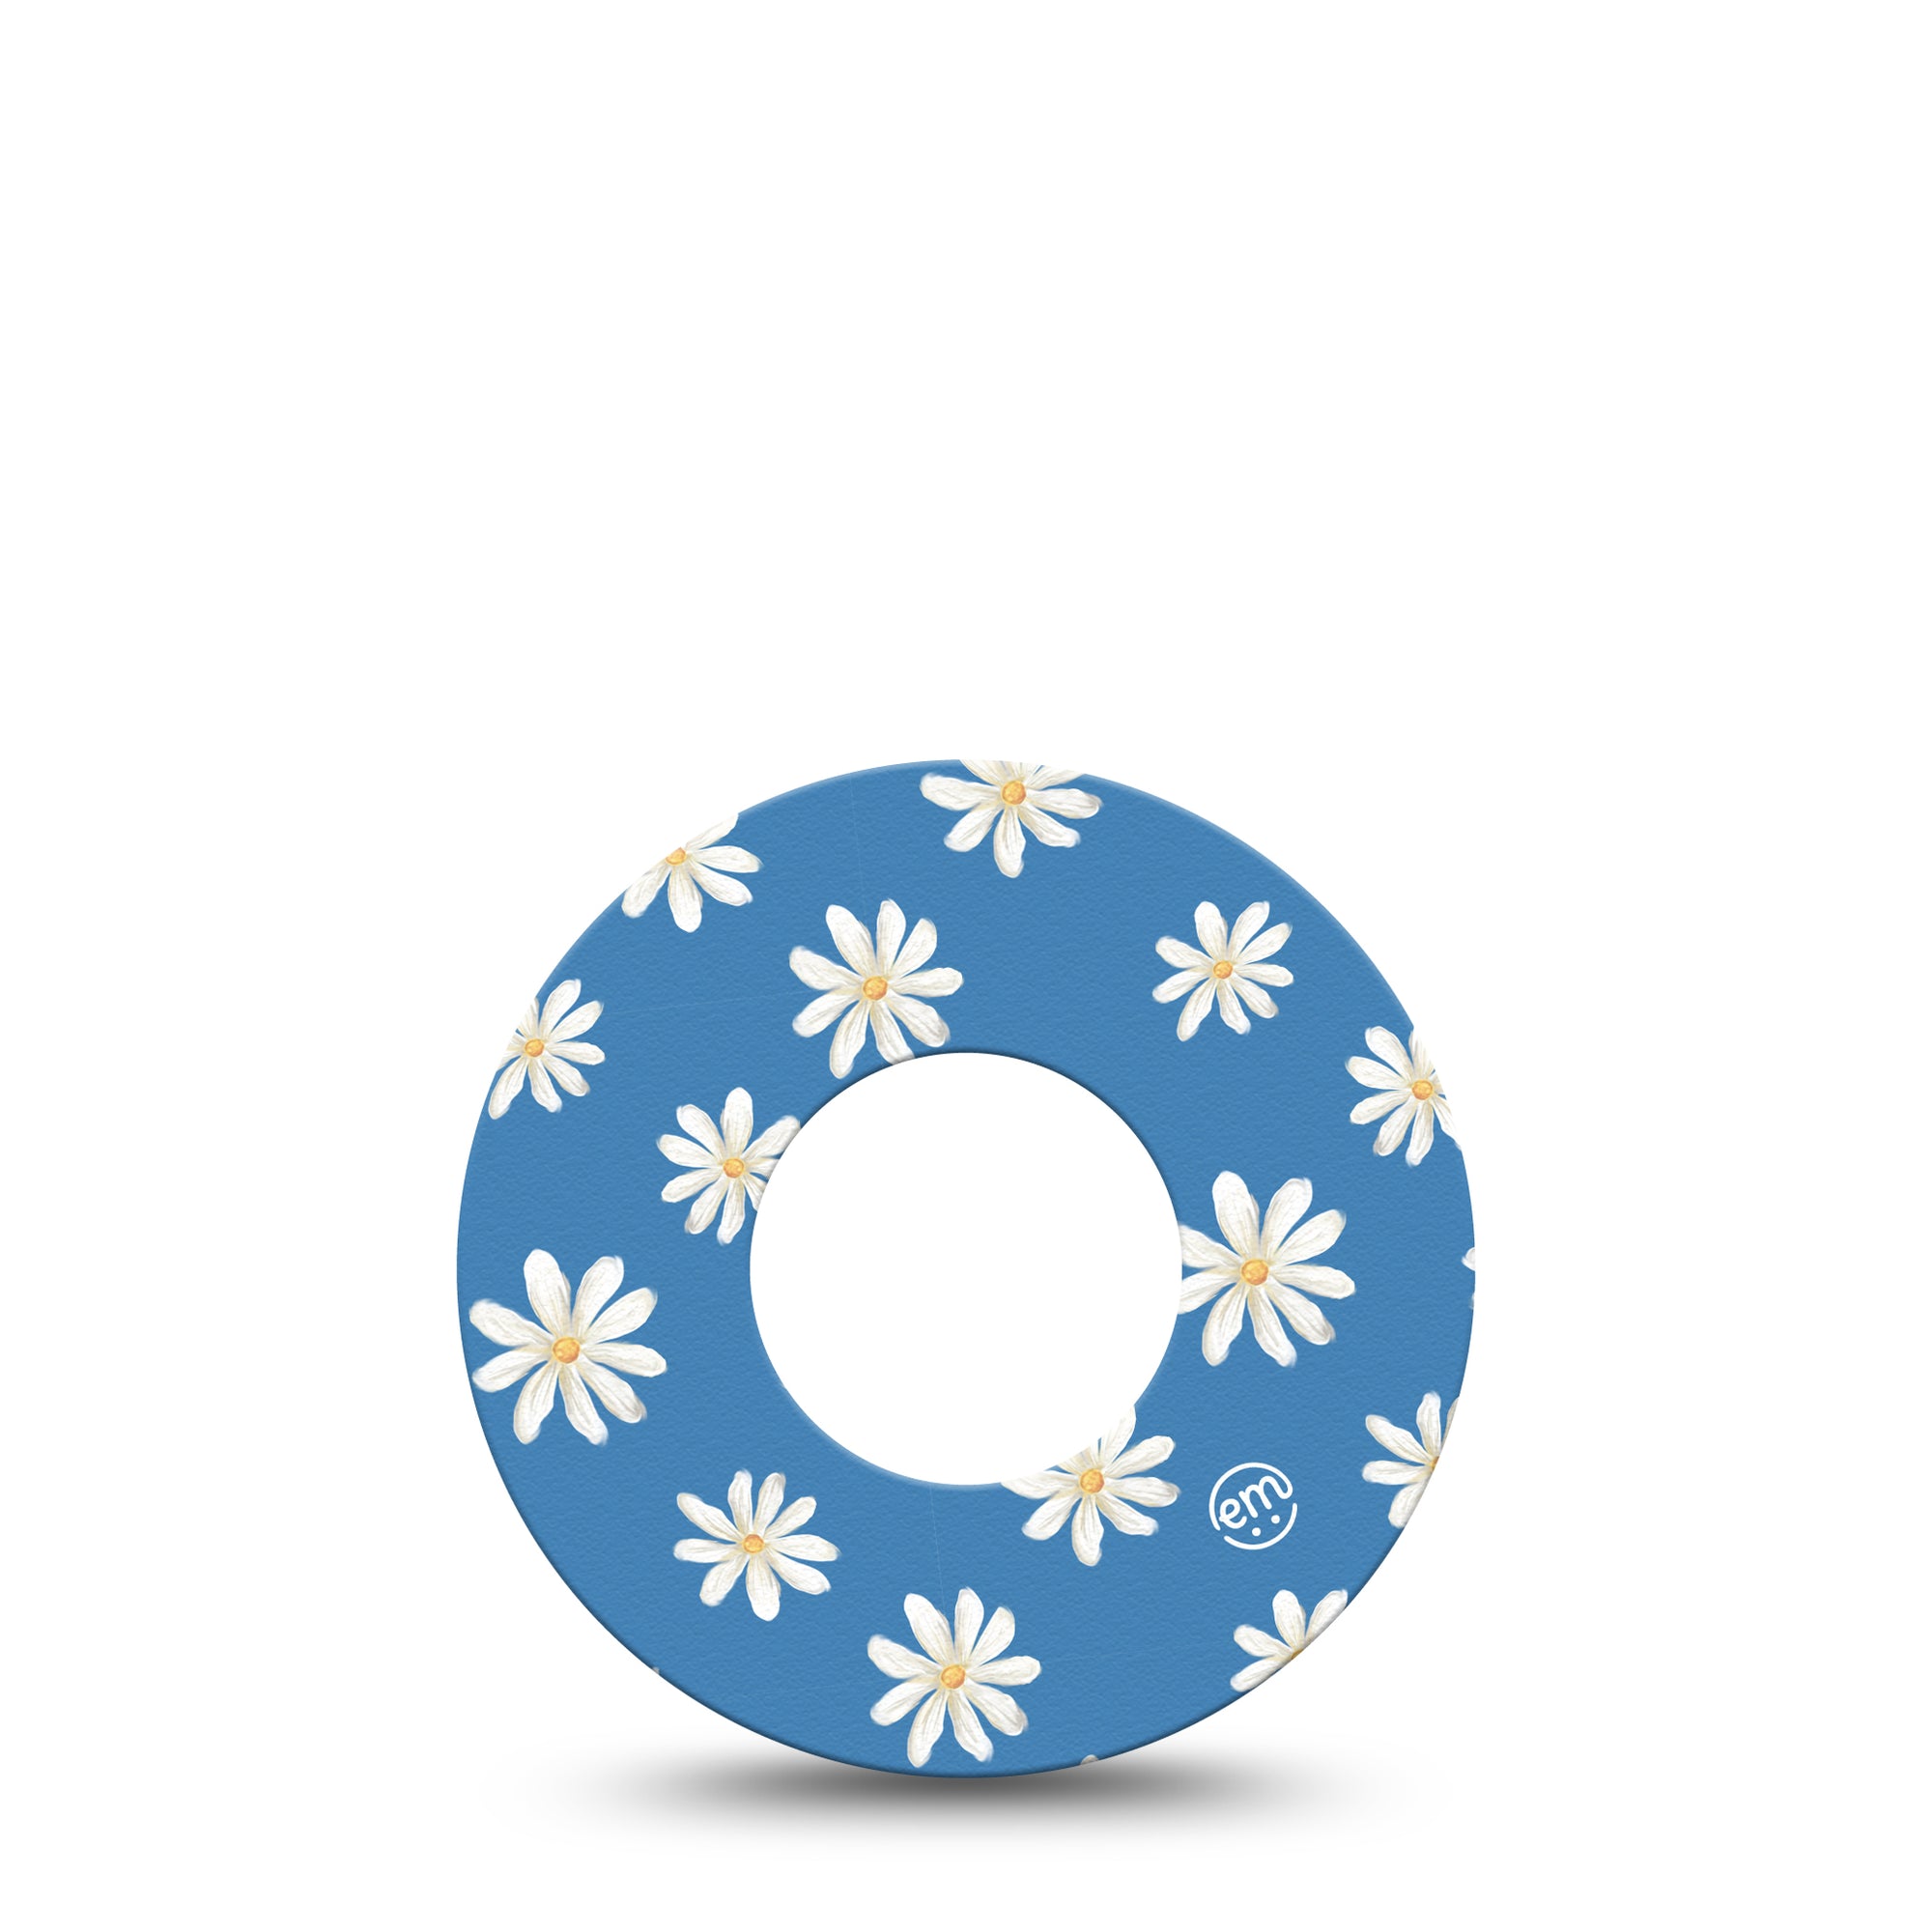 ExpressionMed Painted Daisies Libre Tape